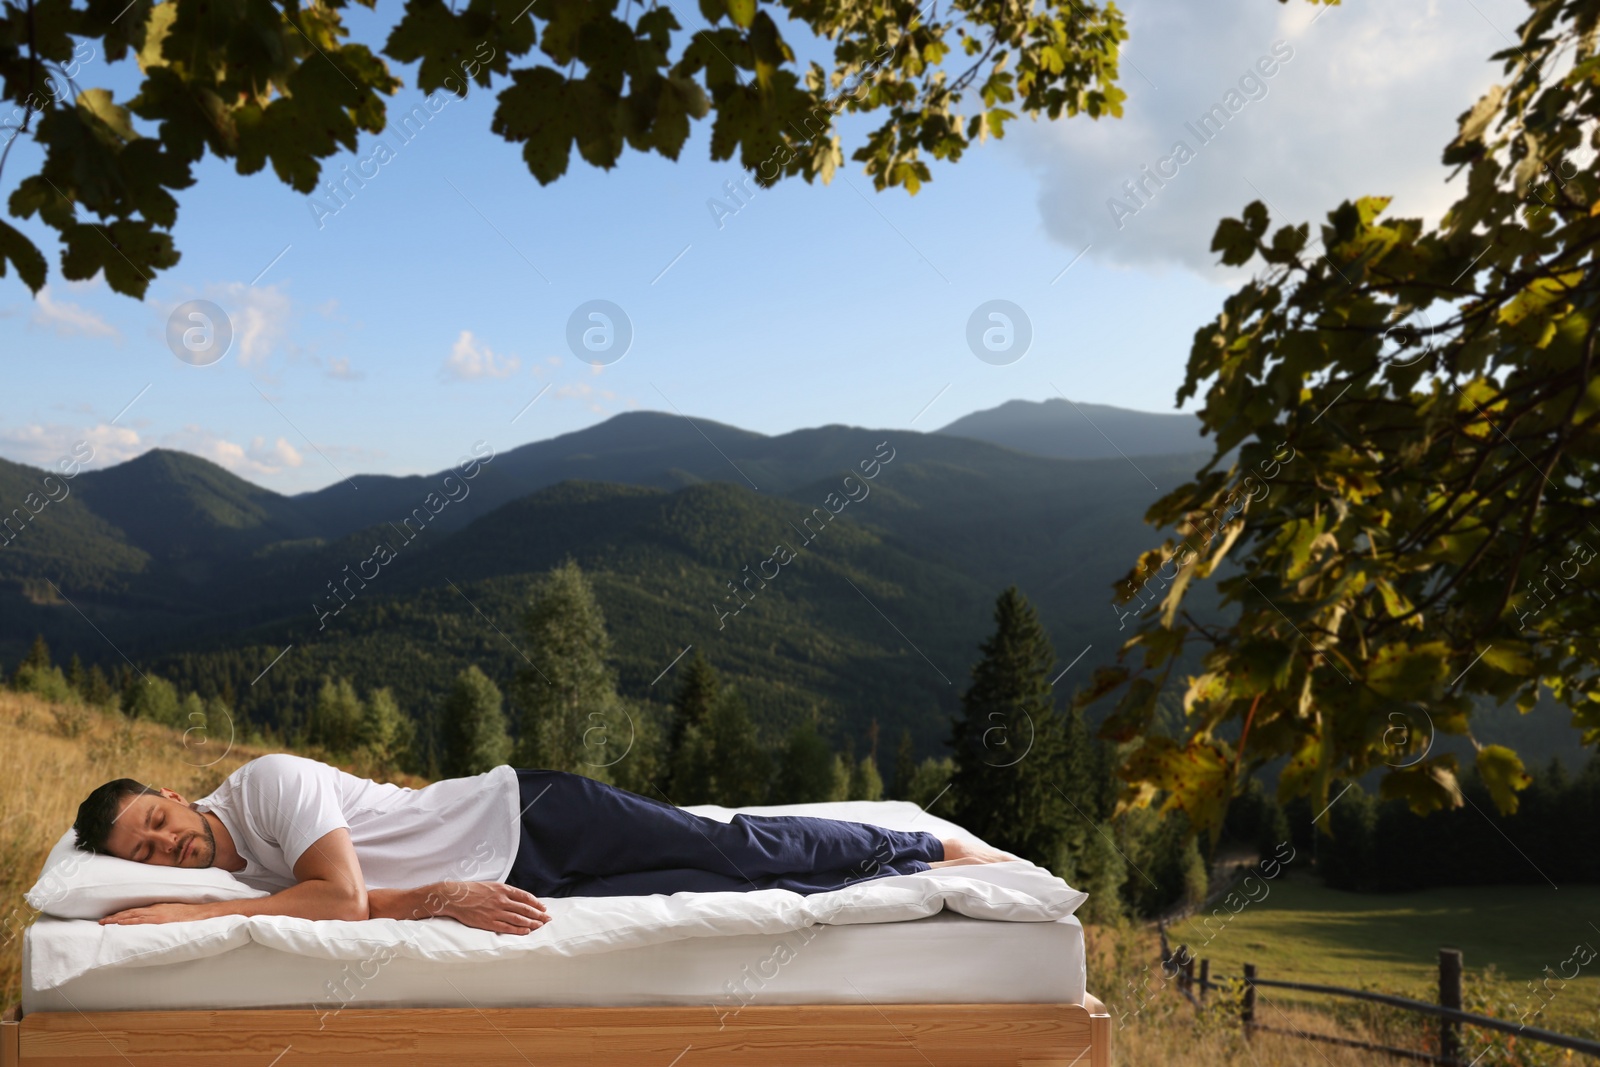 Image of Man sleeping on bed and beautiful view of mountain landscape on background. Sleep well - stay healthy